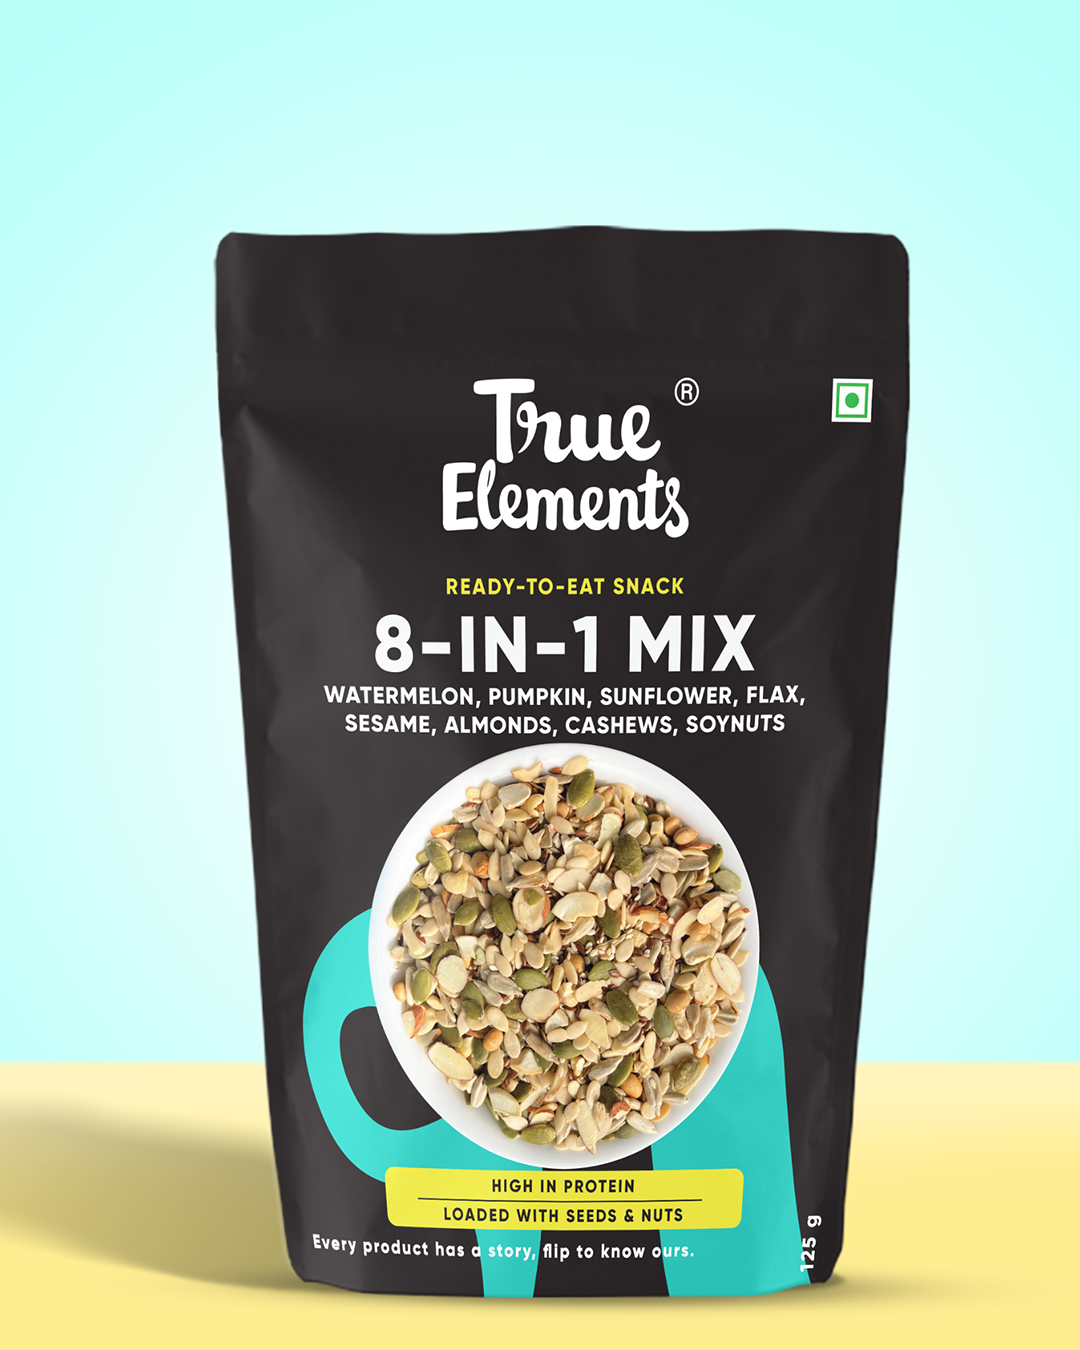 8 in 1 mix with watermelon, pumpkin, sunflower, flax, sesame, almonds, cashews & soynuts in 125g pouch.